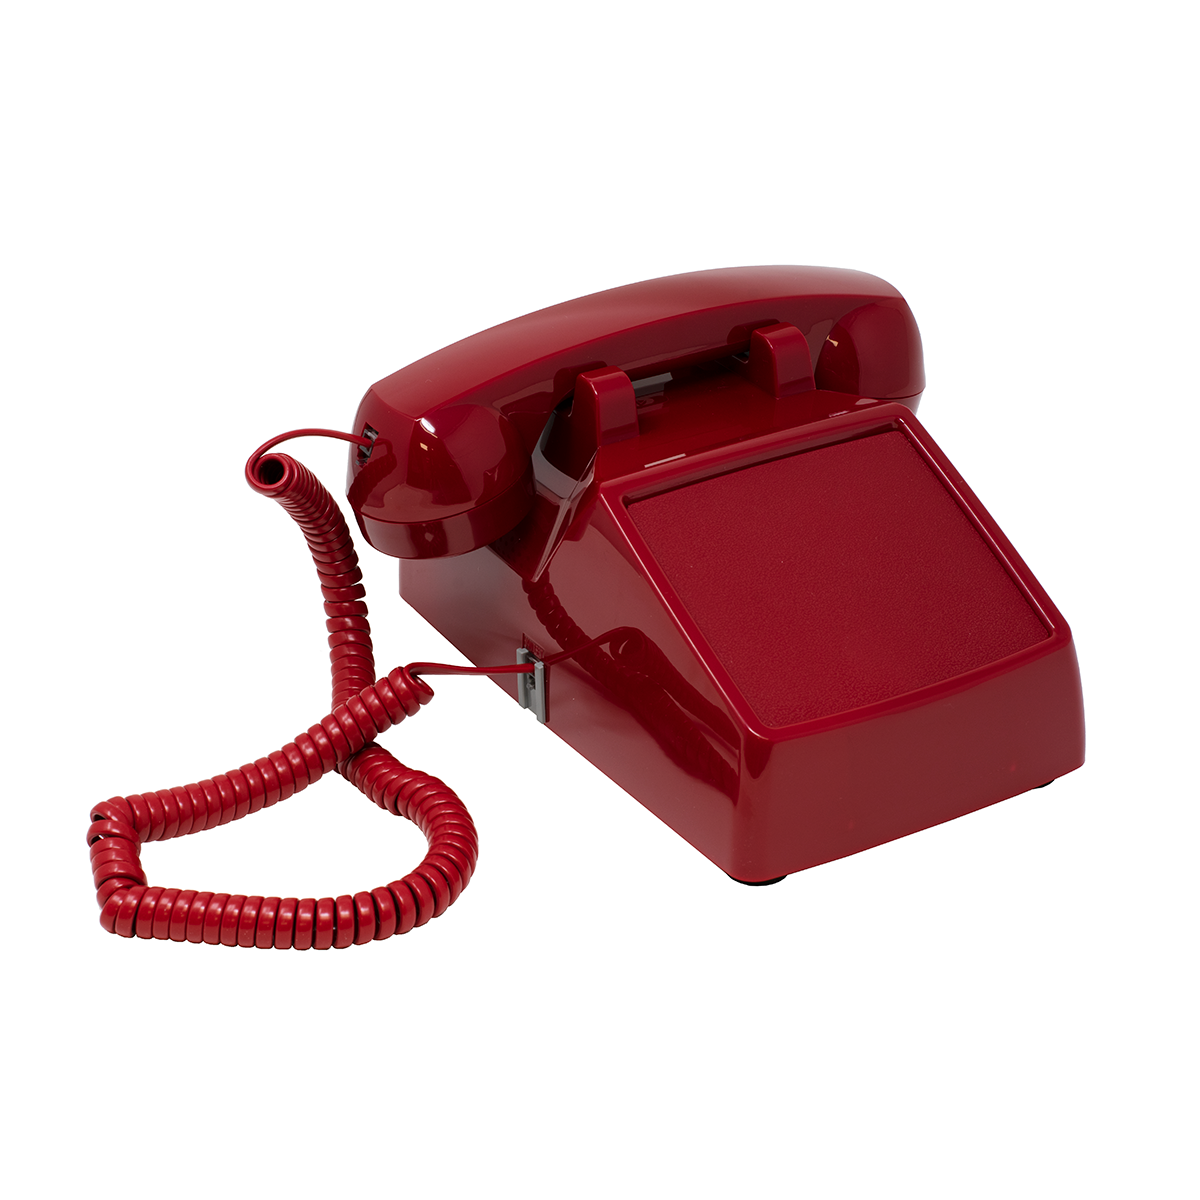 2500 Style Red No-Dial Analog Desk Phone